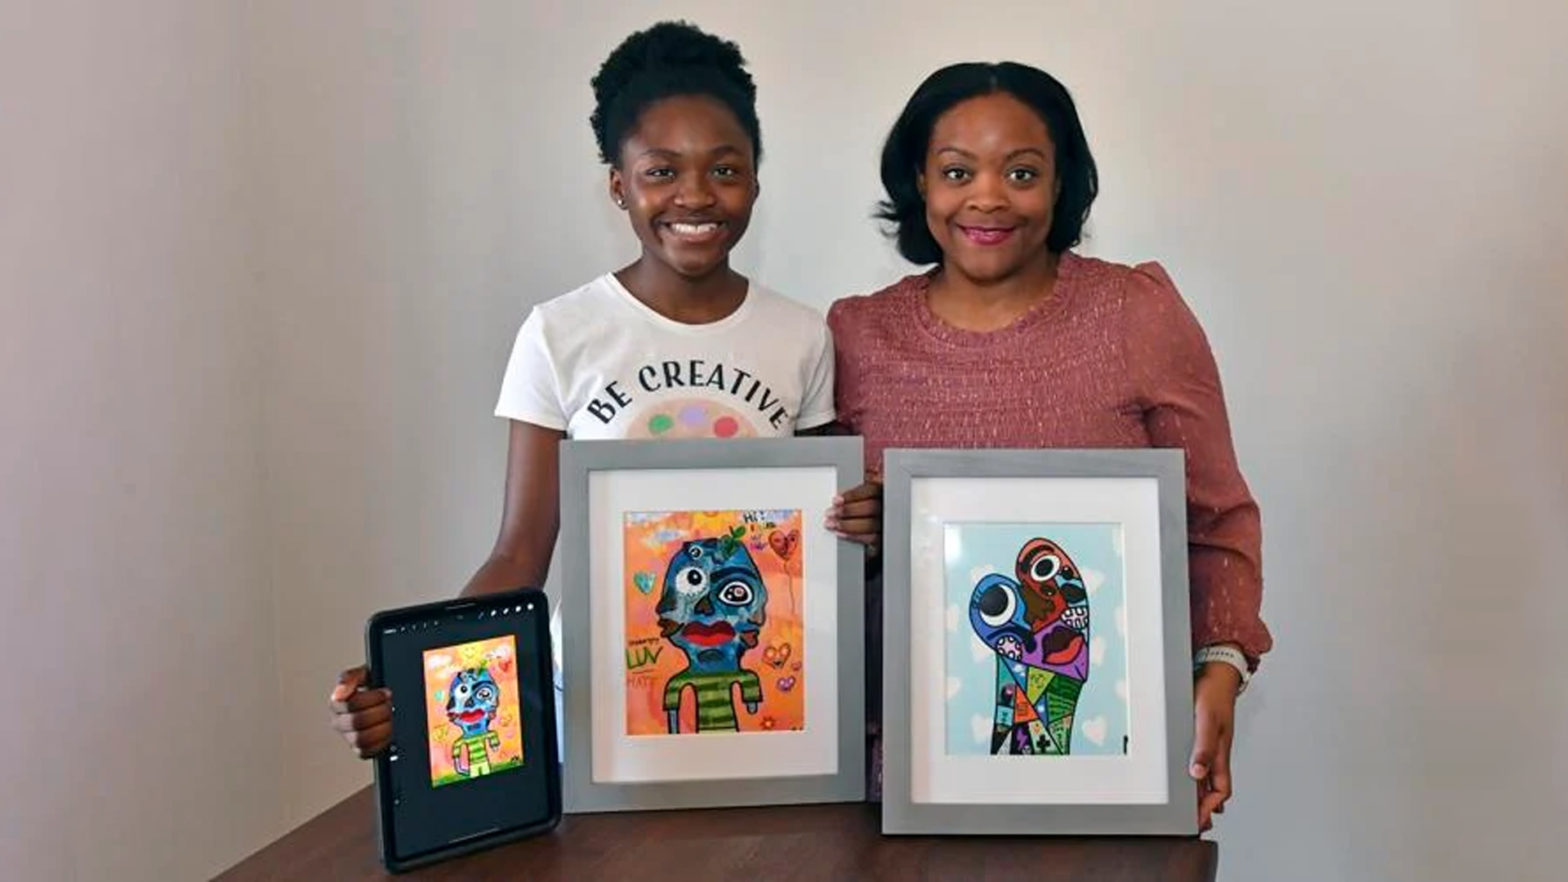 15-Year-Old Mya Parker Turned Her Art Hobby Into NFTs That Earned Her Over $10K In Sales